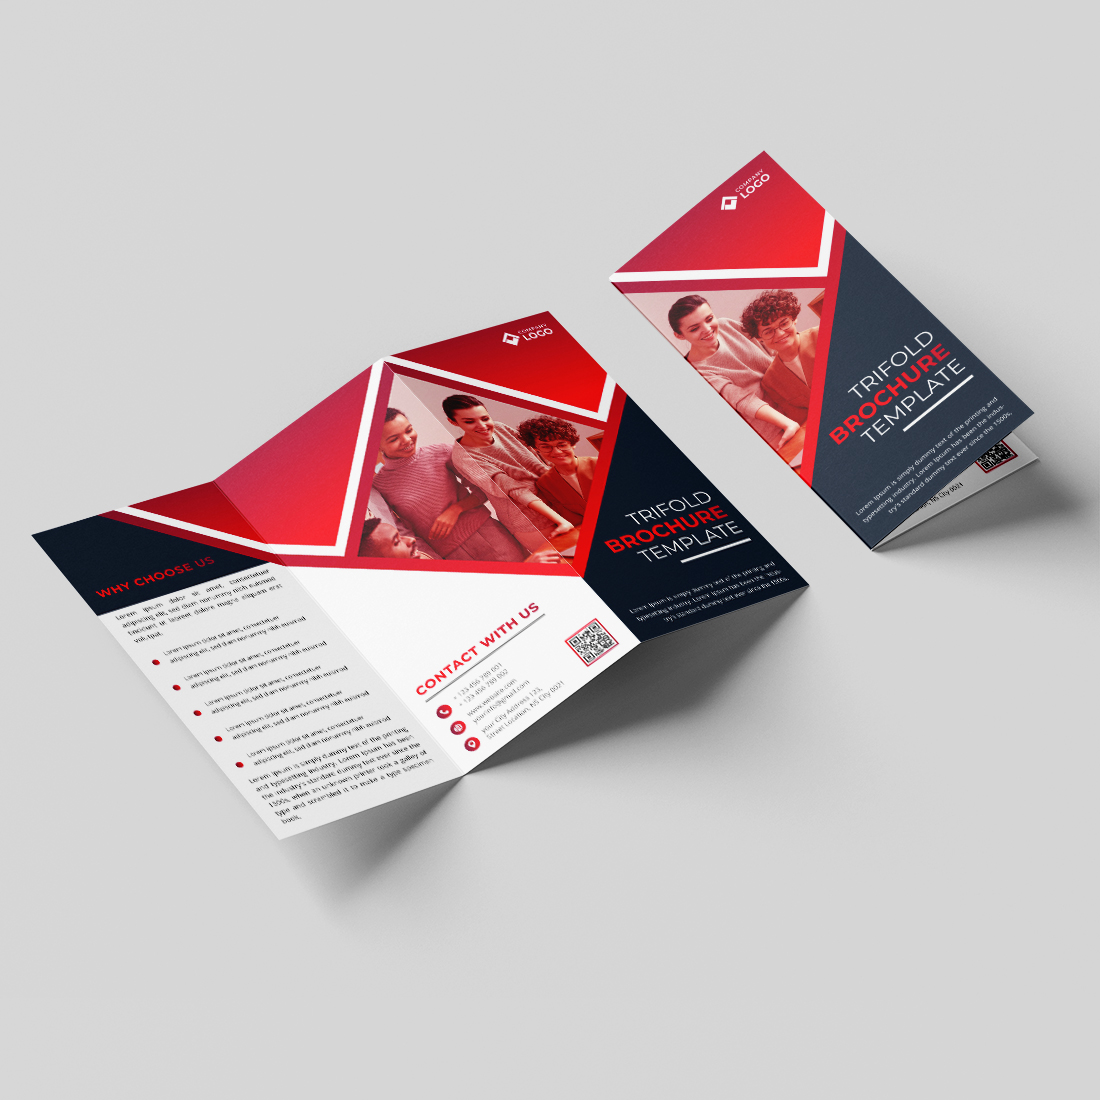 Corporate Trifold Brochure Template Design cover image.